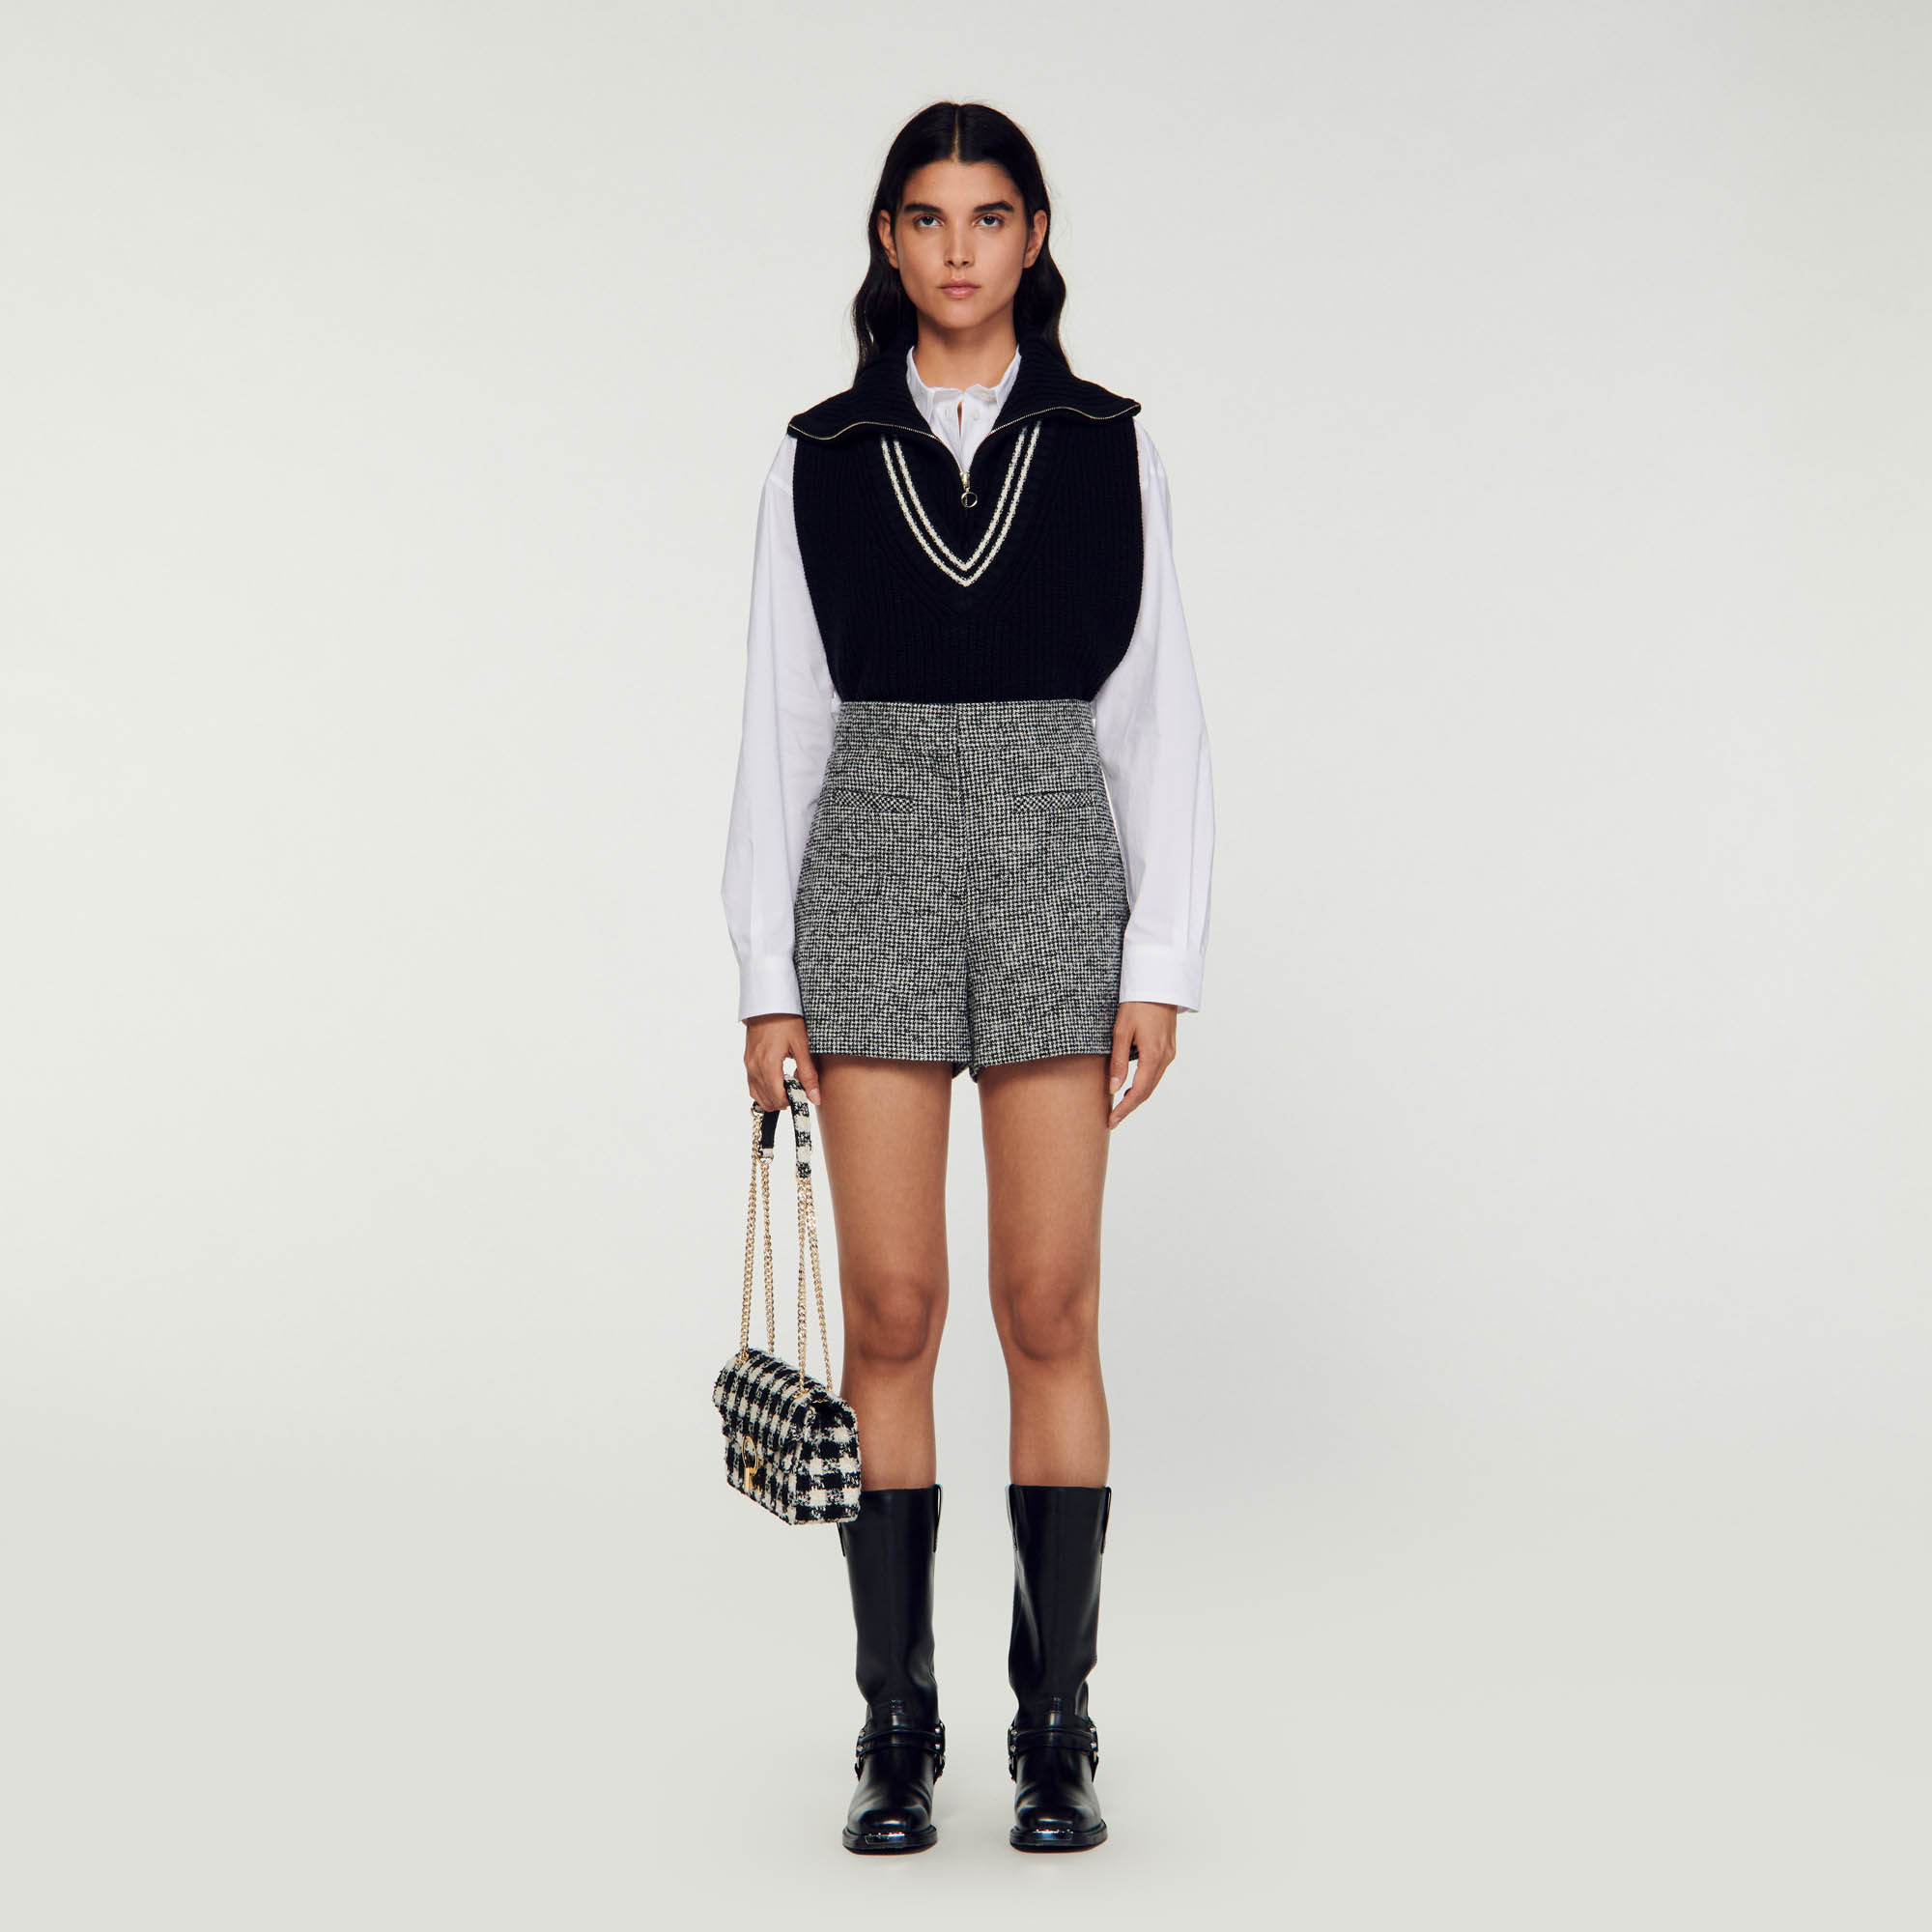 Sandro wool Wool blend shorts with houndstooth pattern, high waist and welt pockets